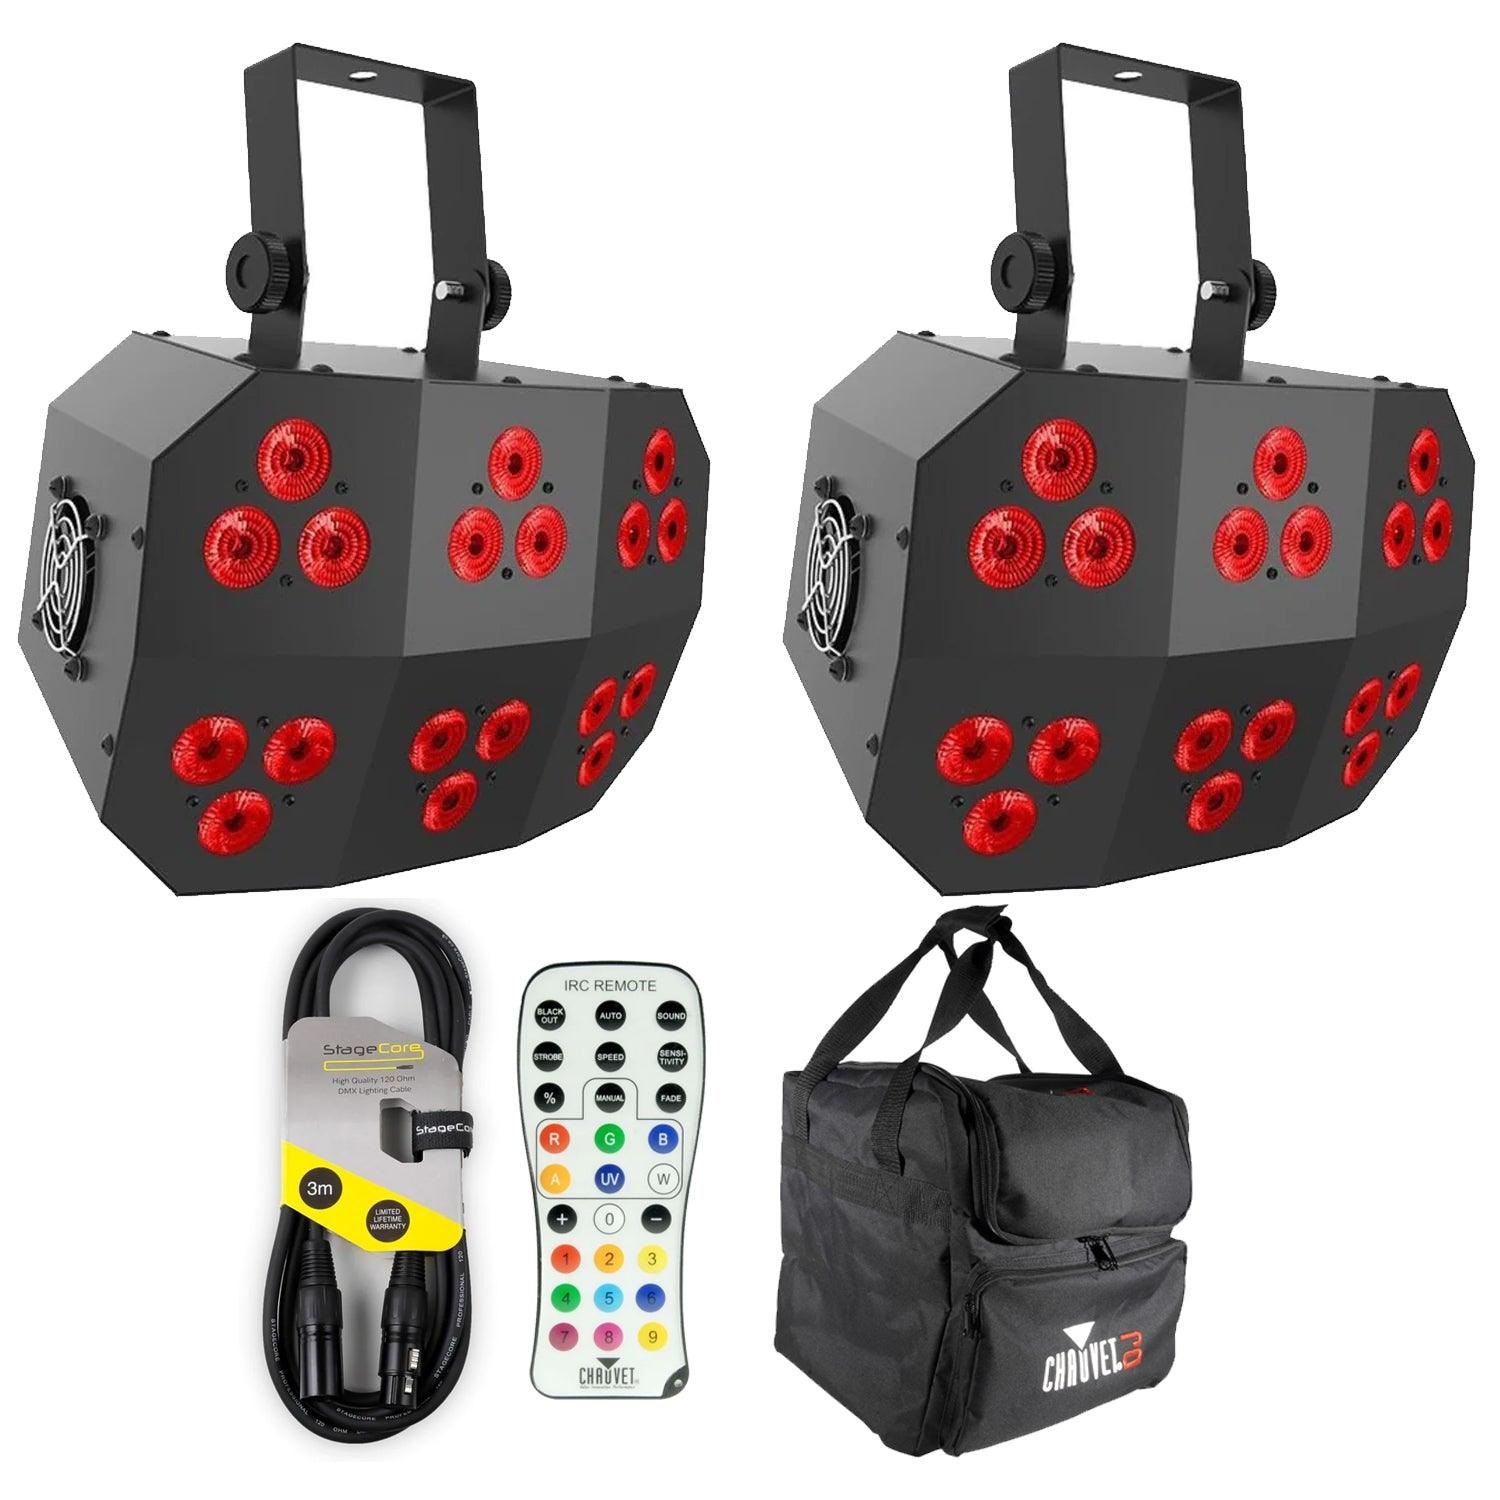 2 x Chauvet Wash FX 2 Effect Light with Carry Bags, Cables, Remote Control - DY Pro Audio